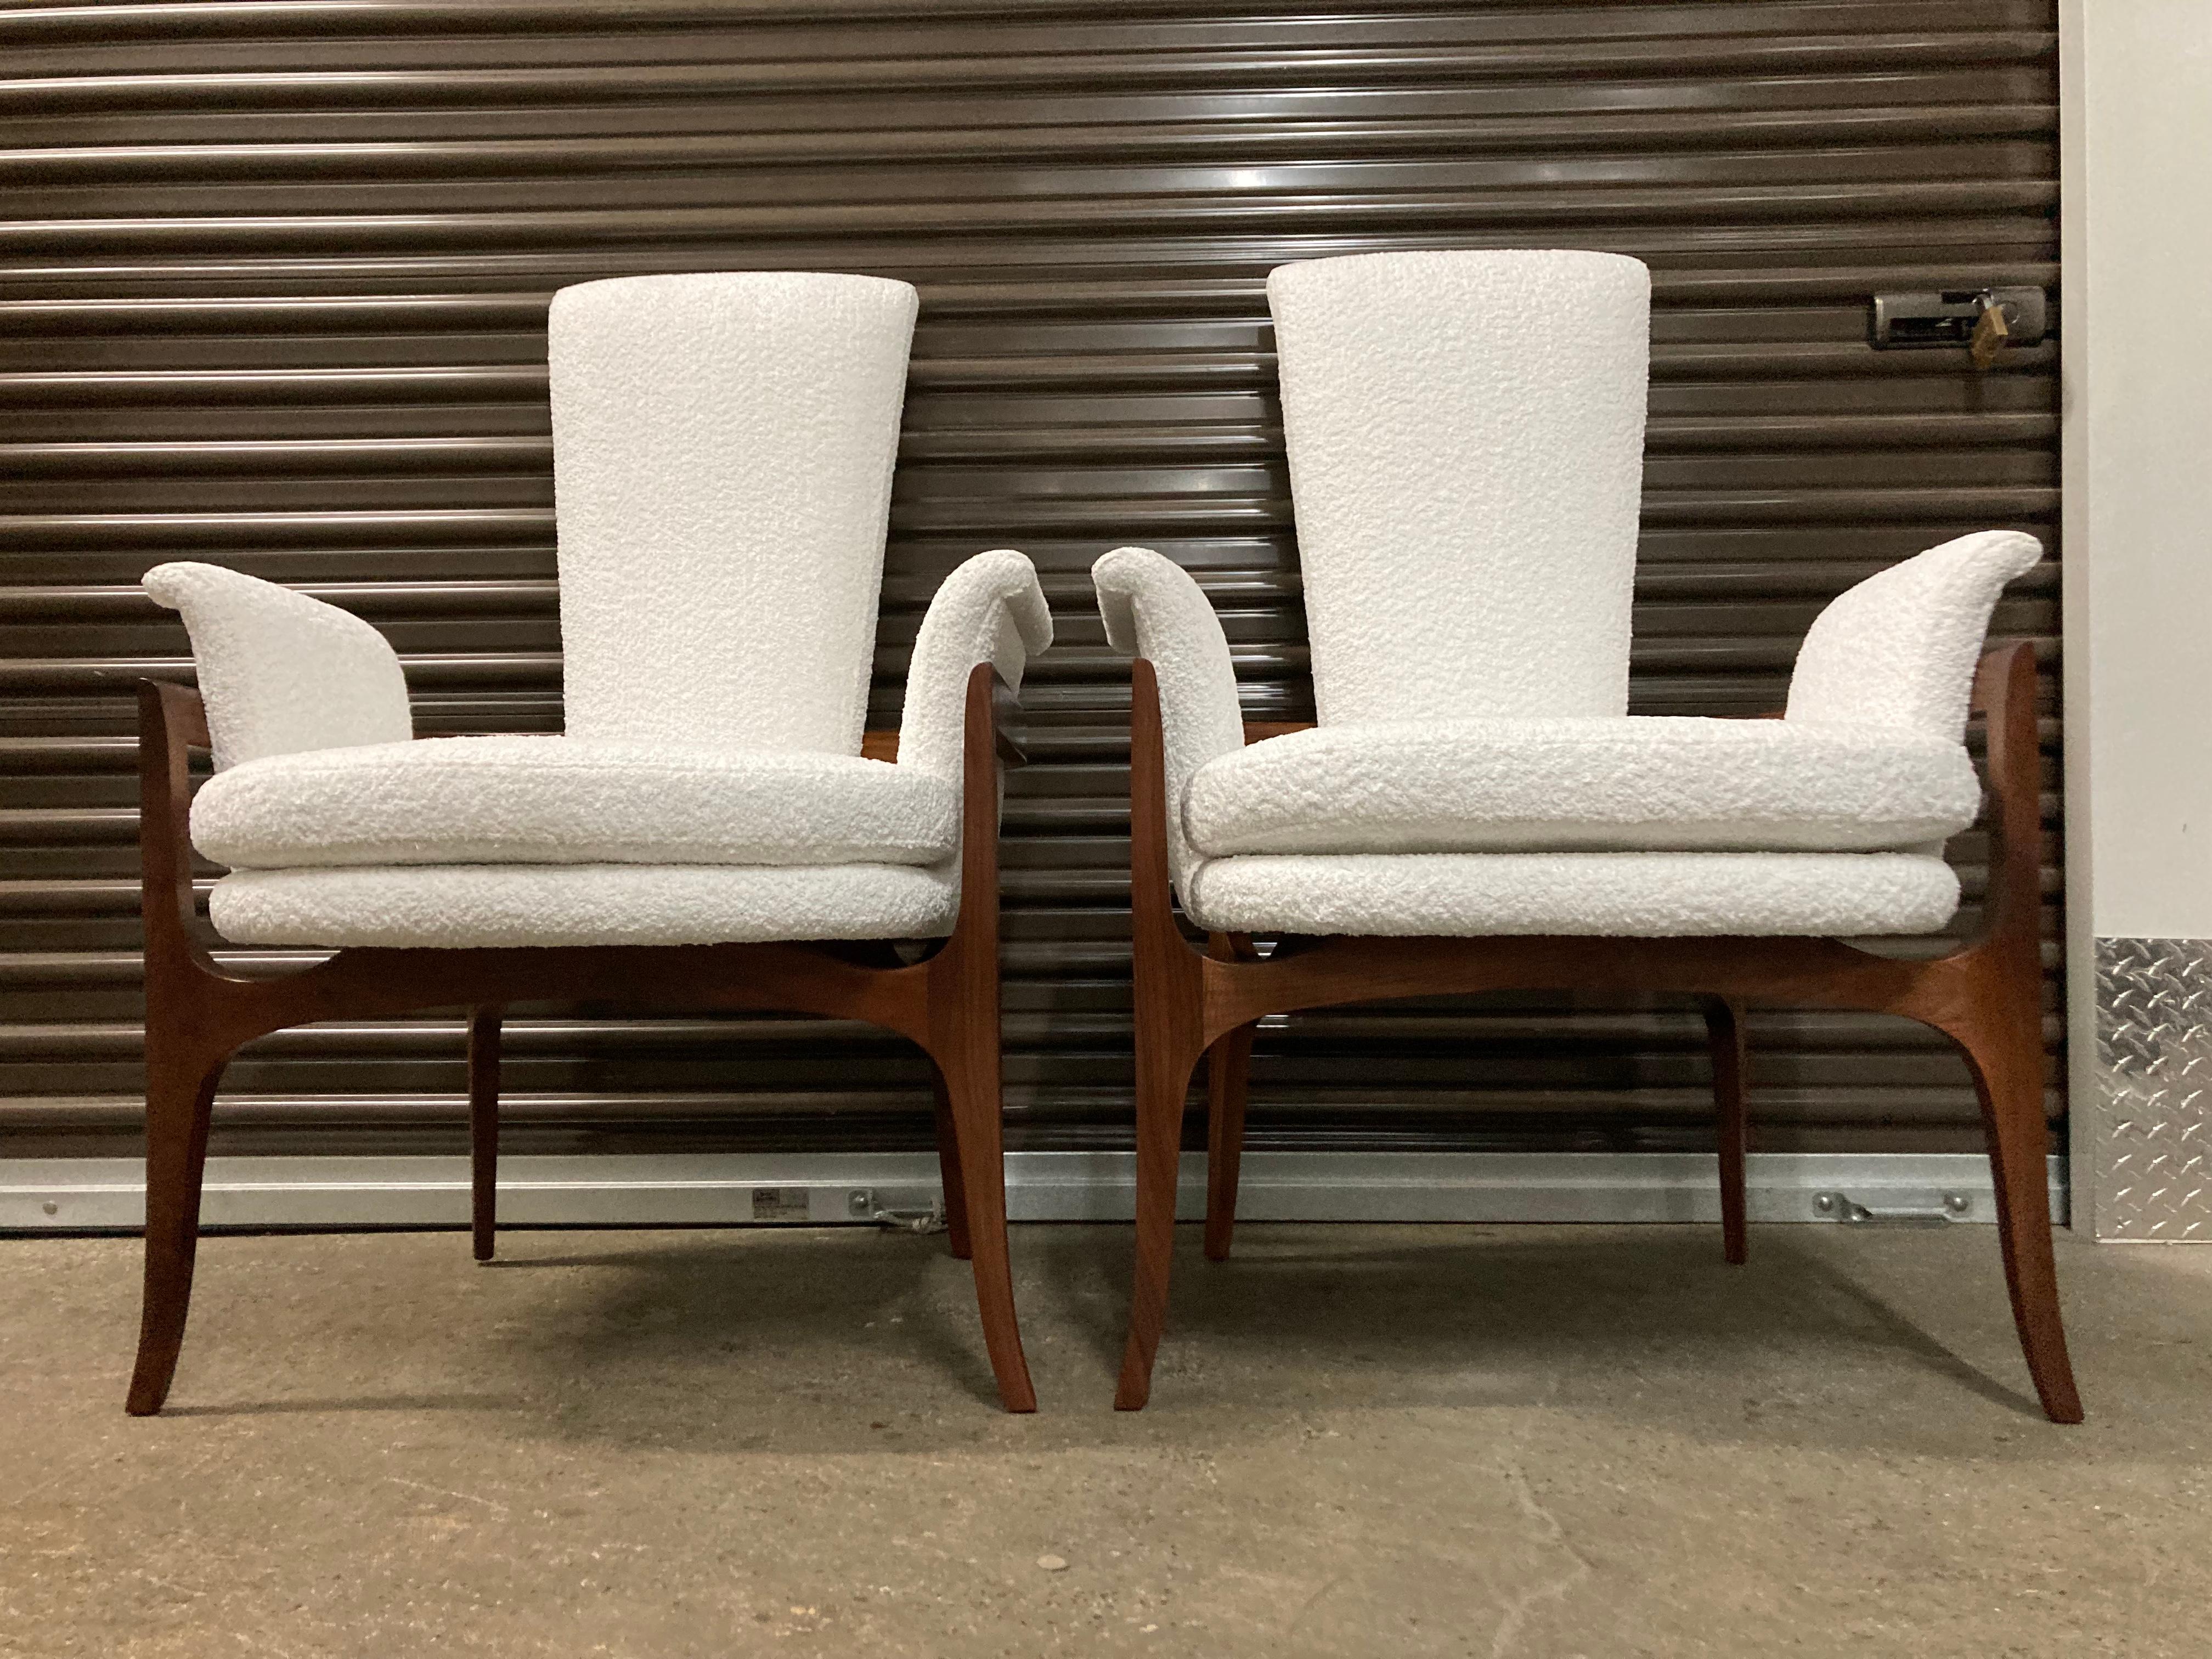 Sculptural Mid-Century Modern Lounge Chairs, Walnut and White Boucle Fabric For Sale 15